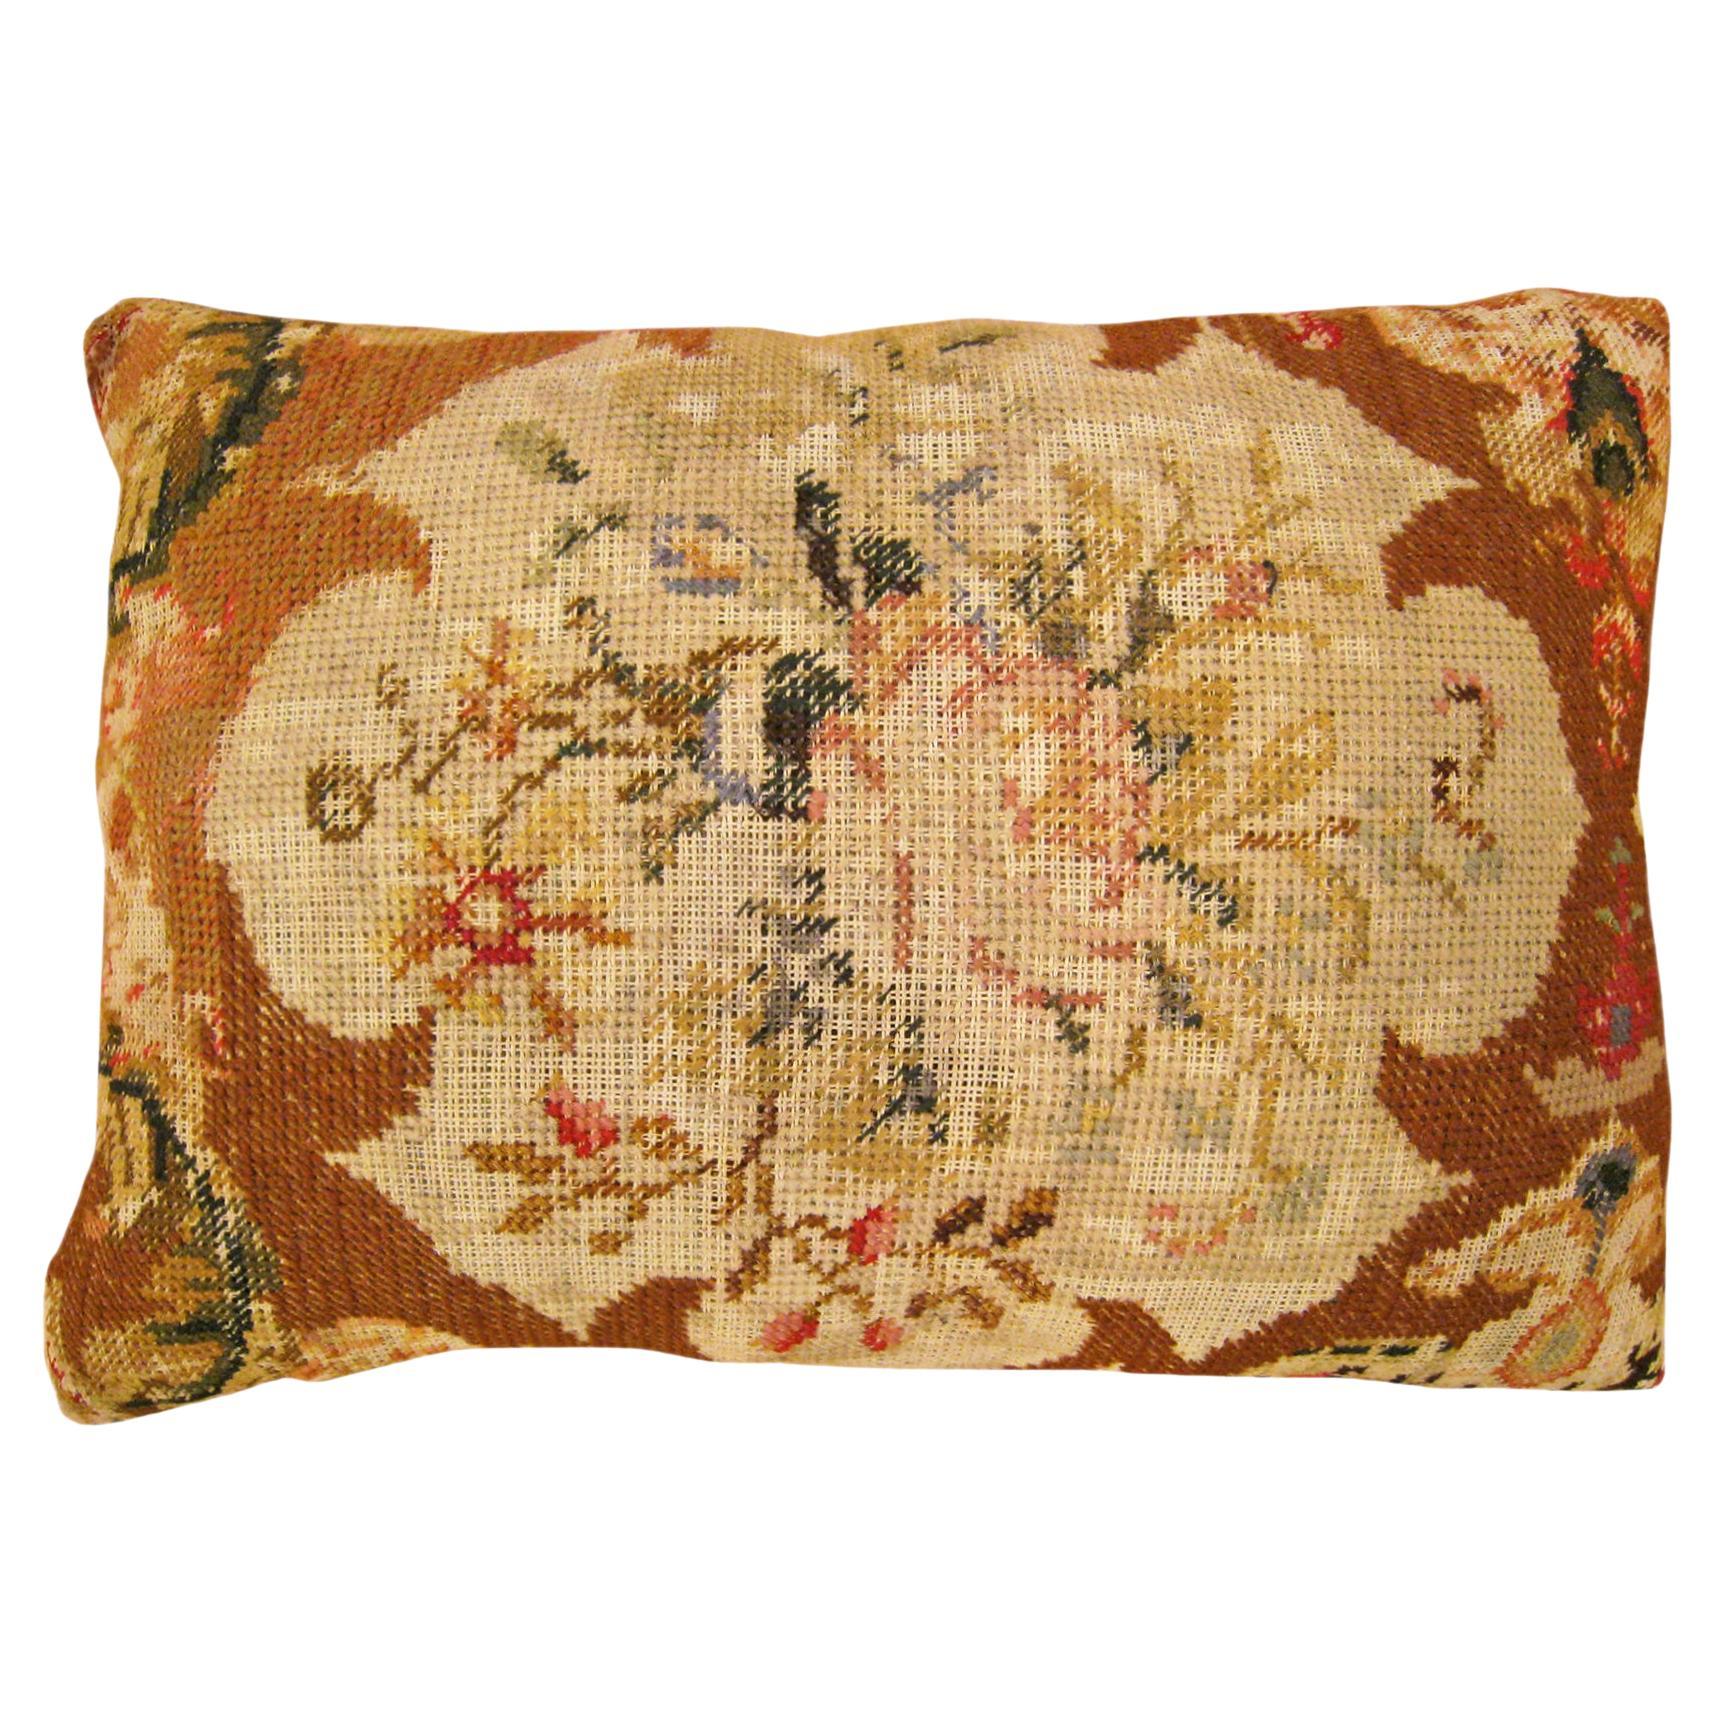 Antique Decorative English Needlepoint Rug Pillow with Floral Elements